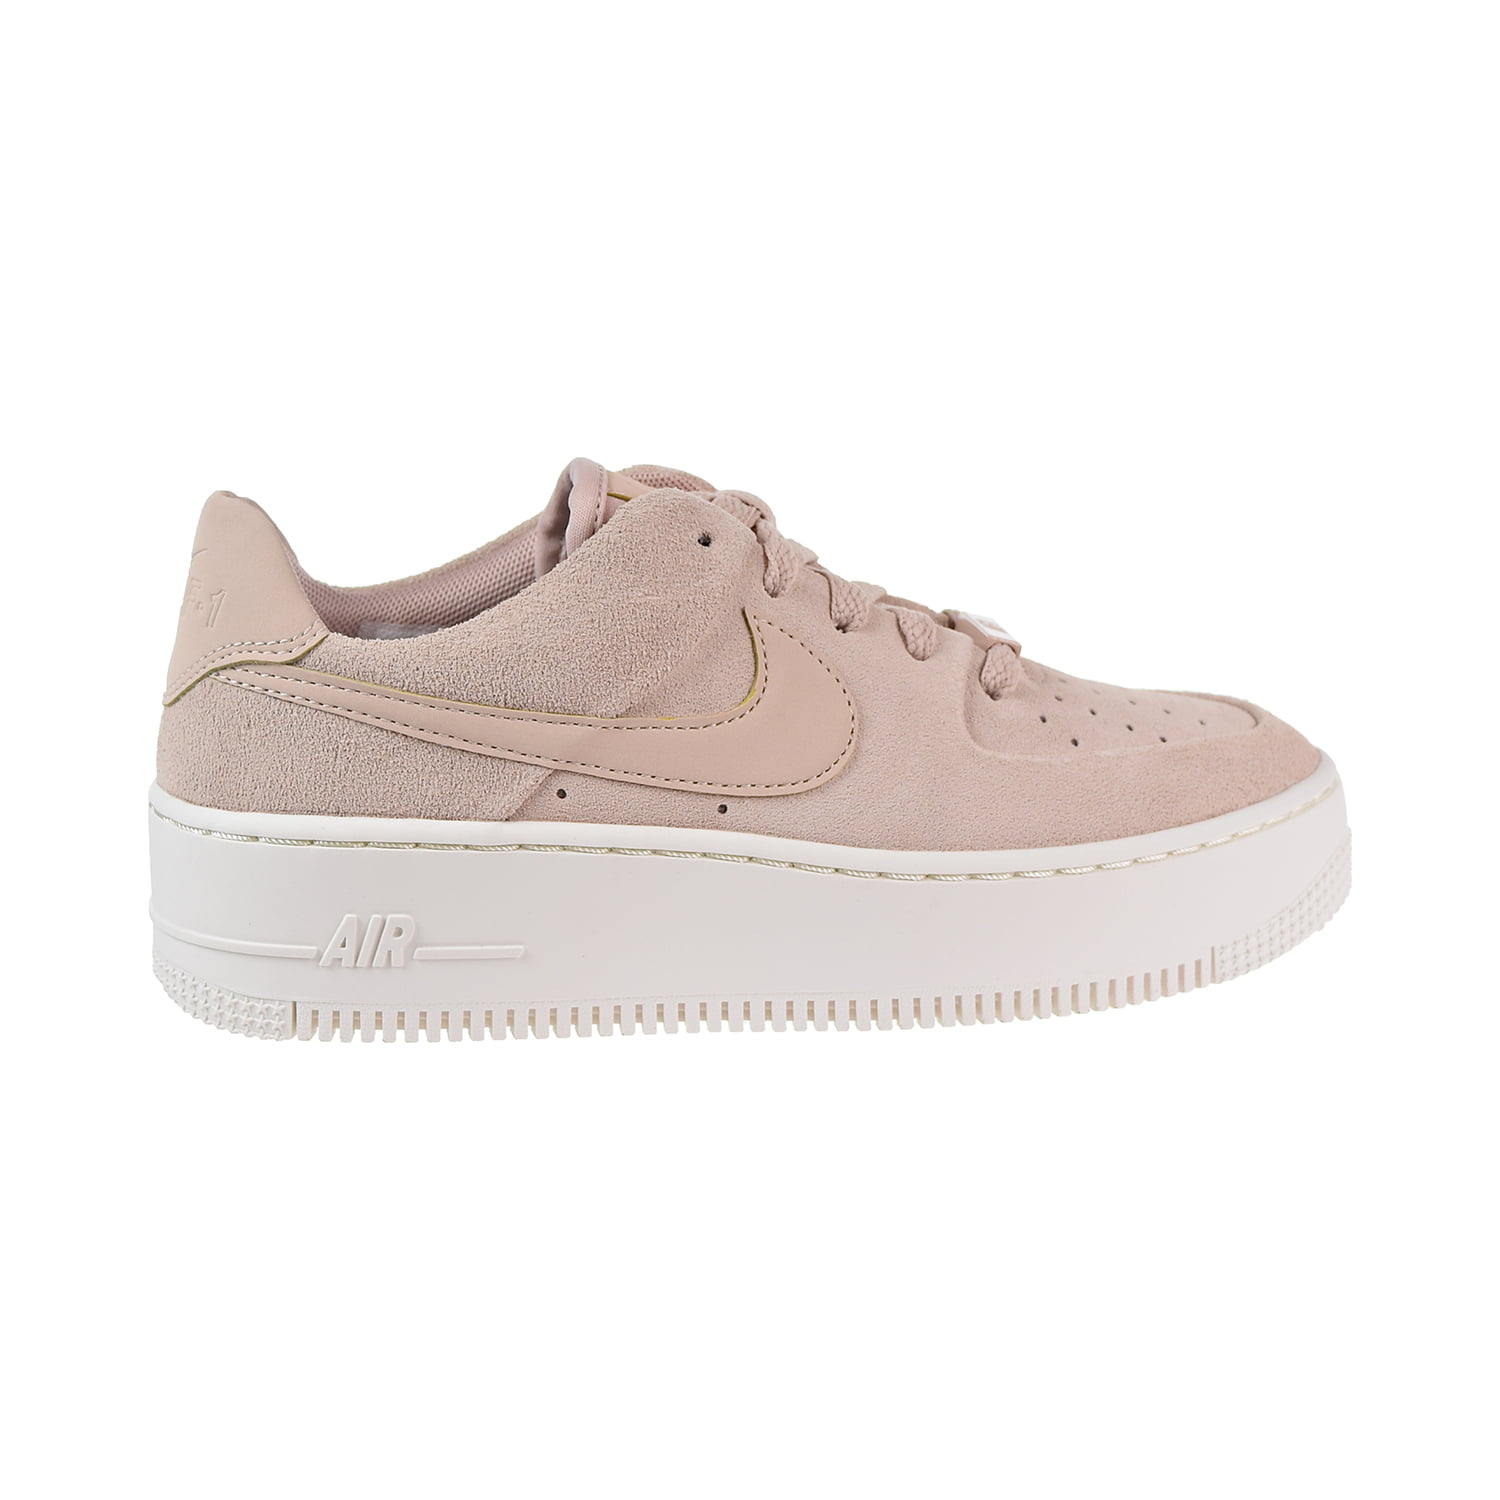 Nike Air Force 1 Sage Low Women's Shoes Particle Beige ar5339-201